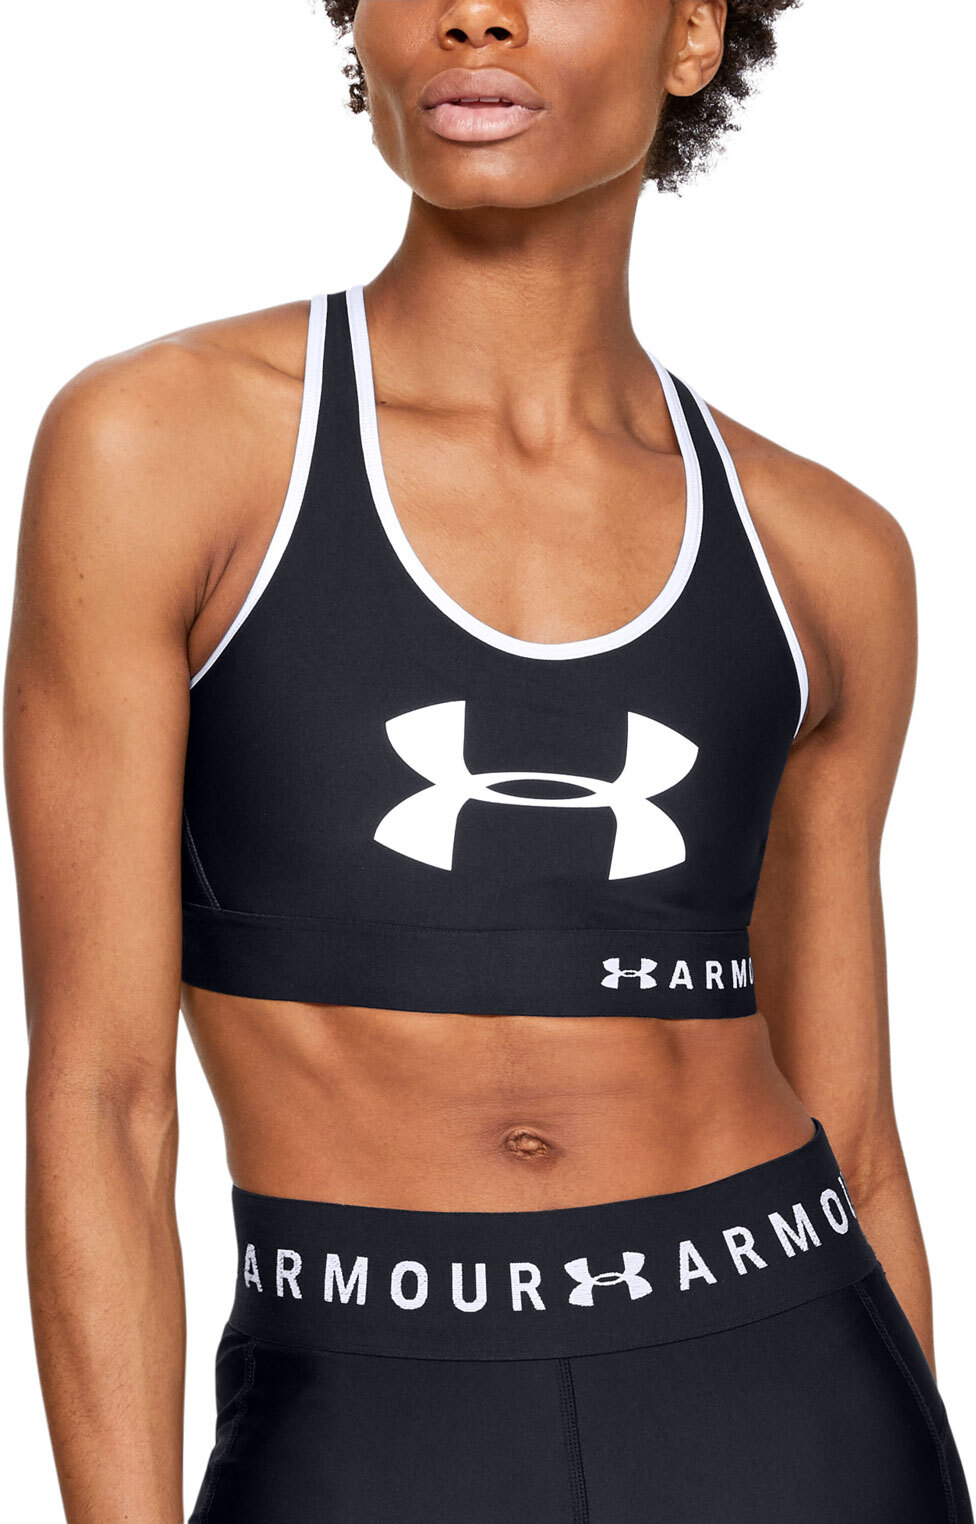 https://static.insales-cdn.com/images/products/1/7685/584957445/under-armour-women-s-armour-mid-keyhole-graphic-sports-bra-black-3.jpg